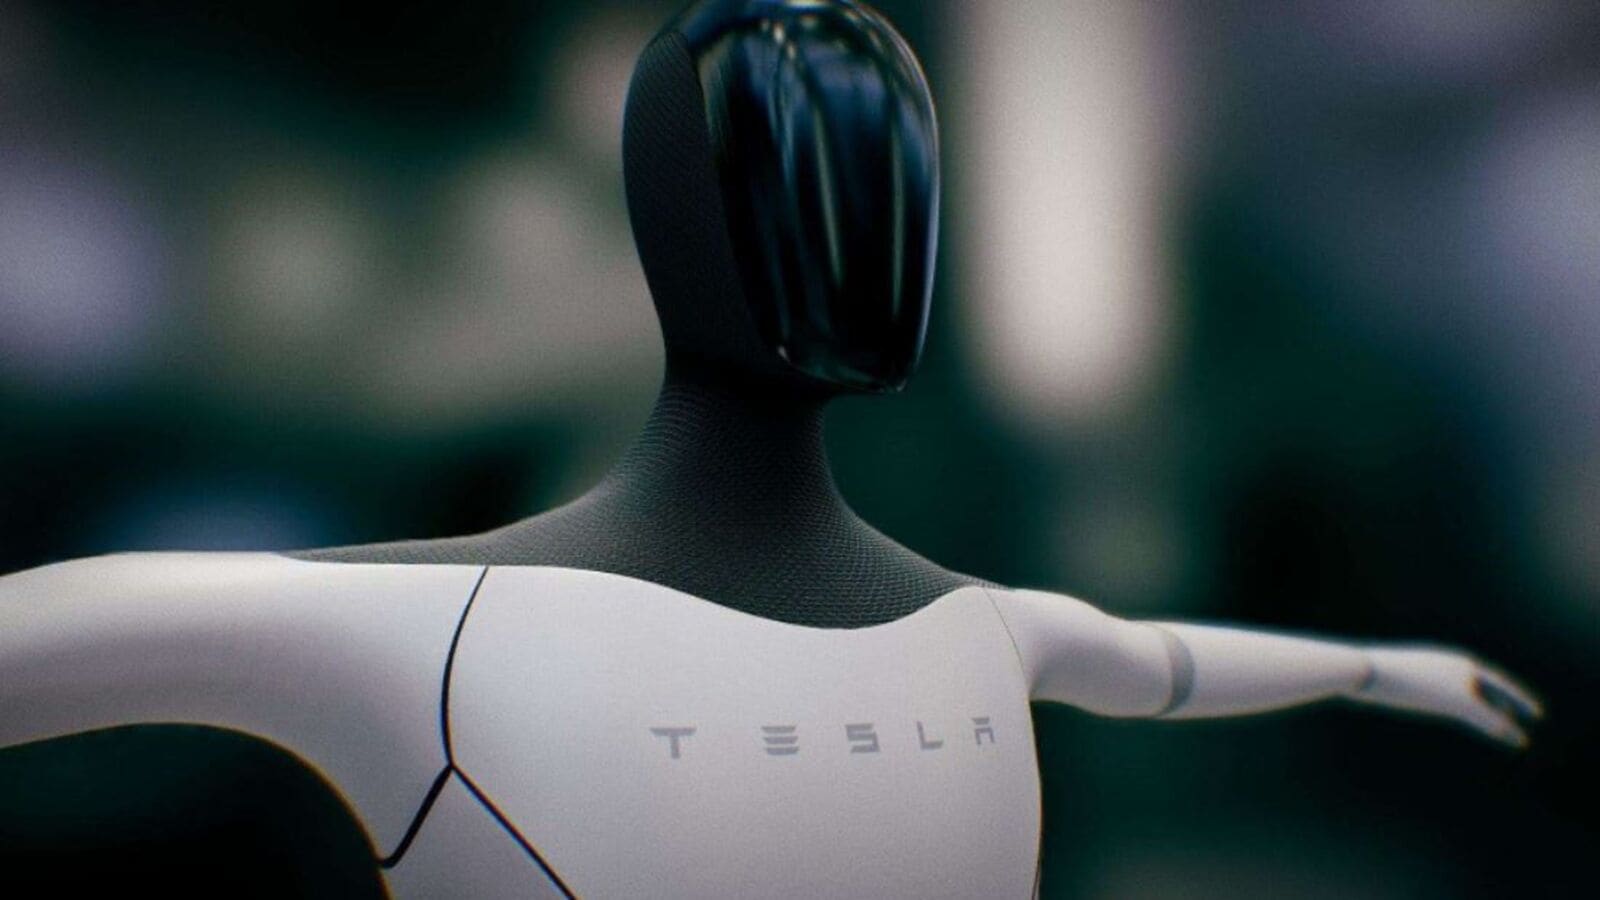 Elon Musk says Tesla likely to ready humanoid robot prototype within months  | Auto News